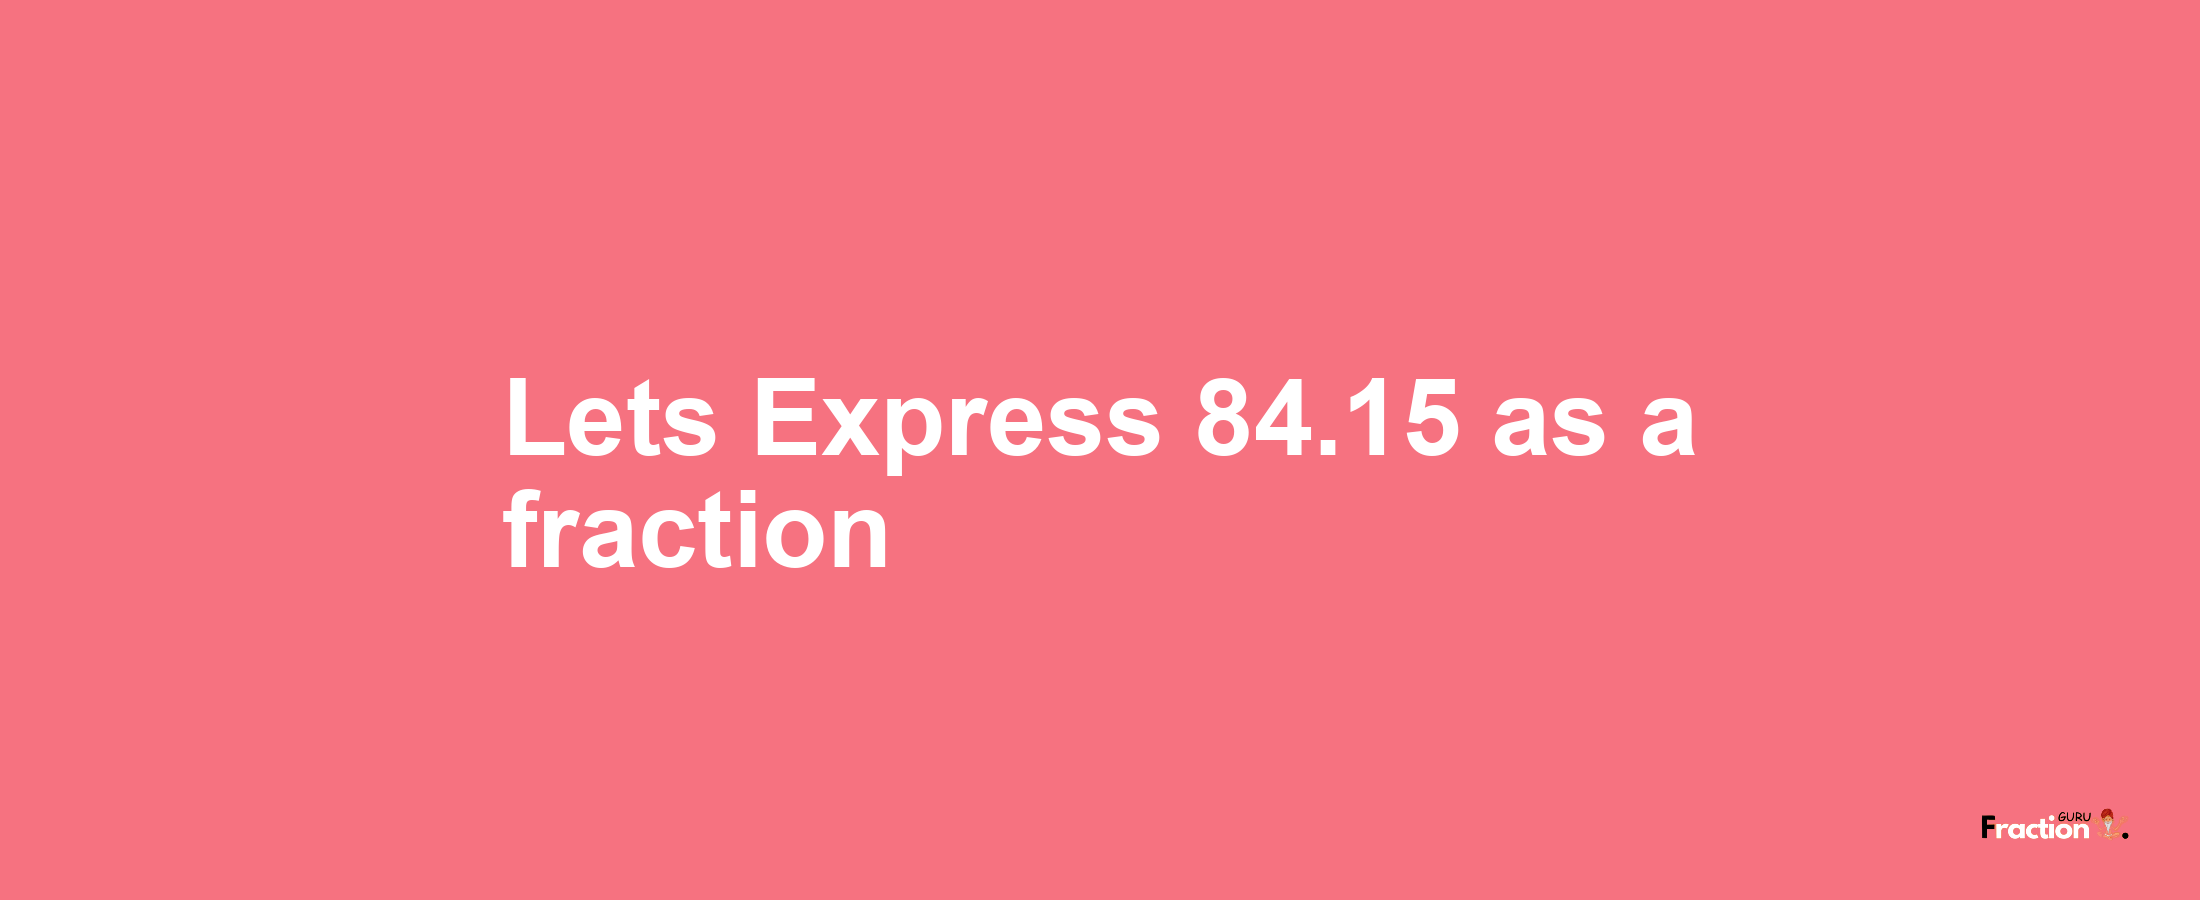 Lets Express 84.15 as afraction